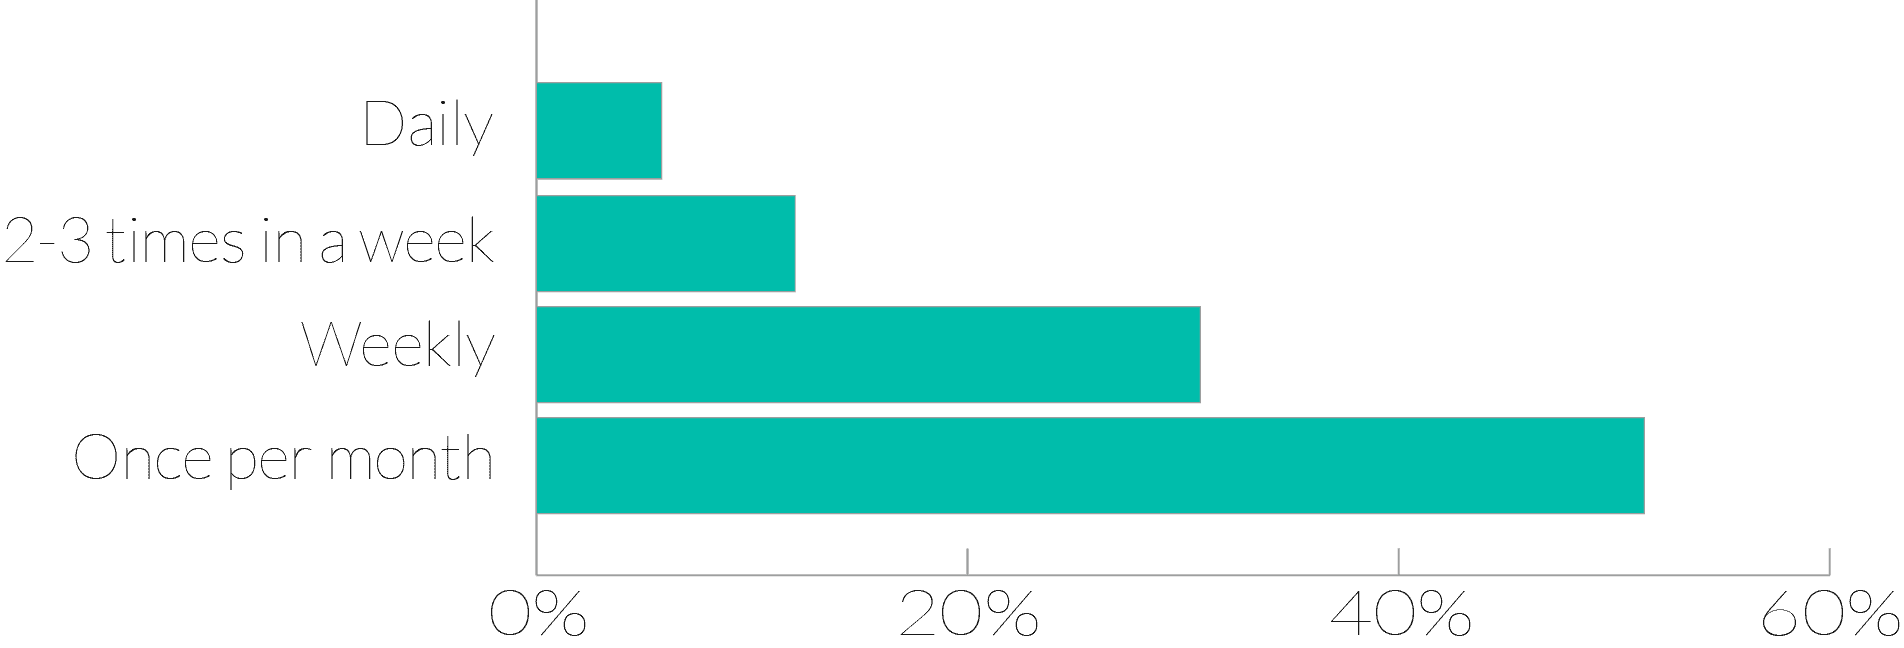 How often have you been using Morningscore? - bar graph